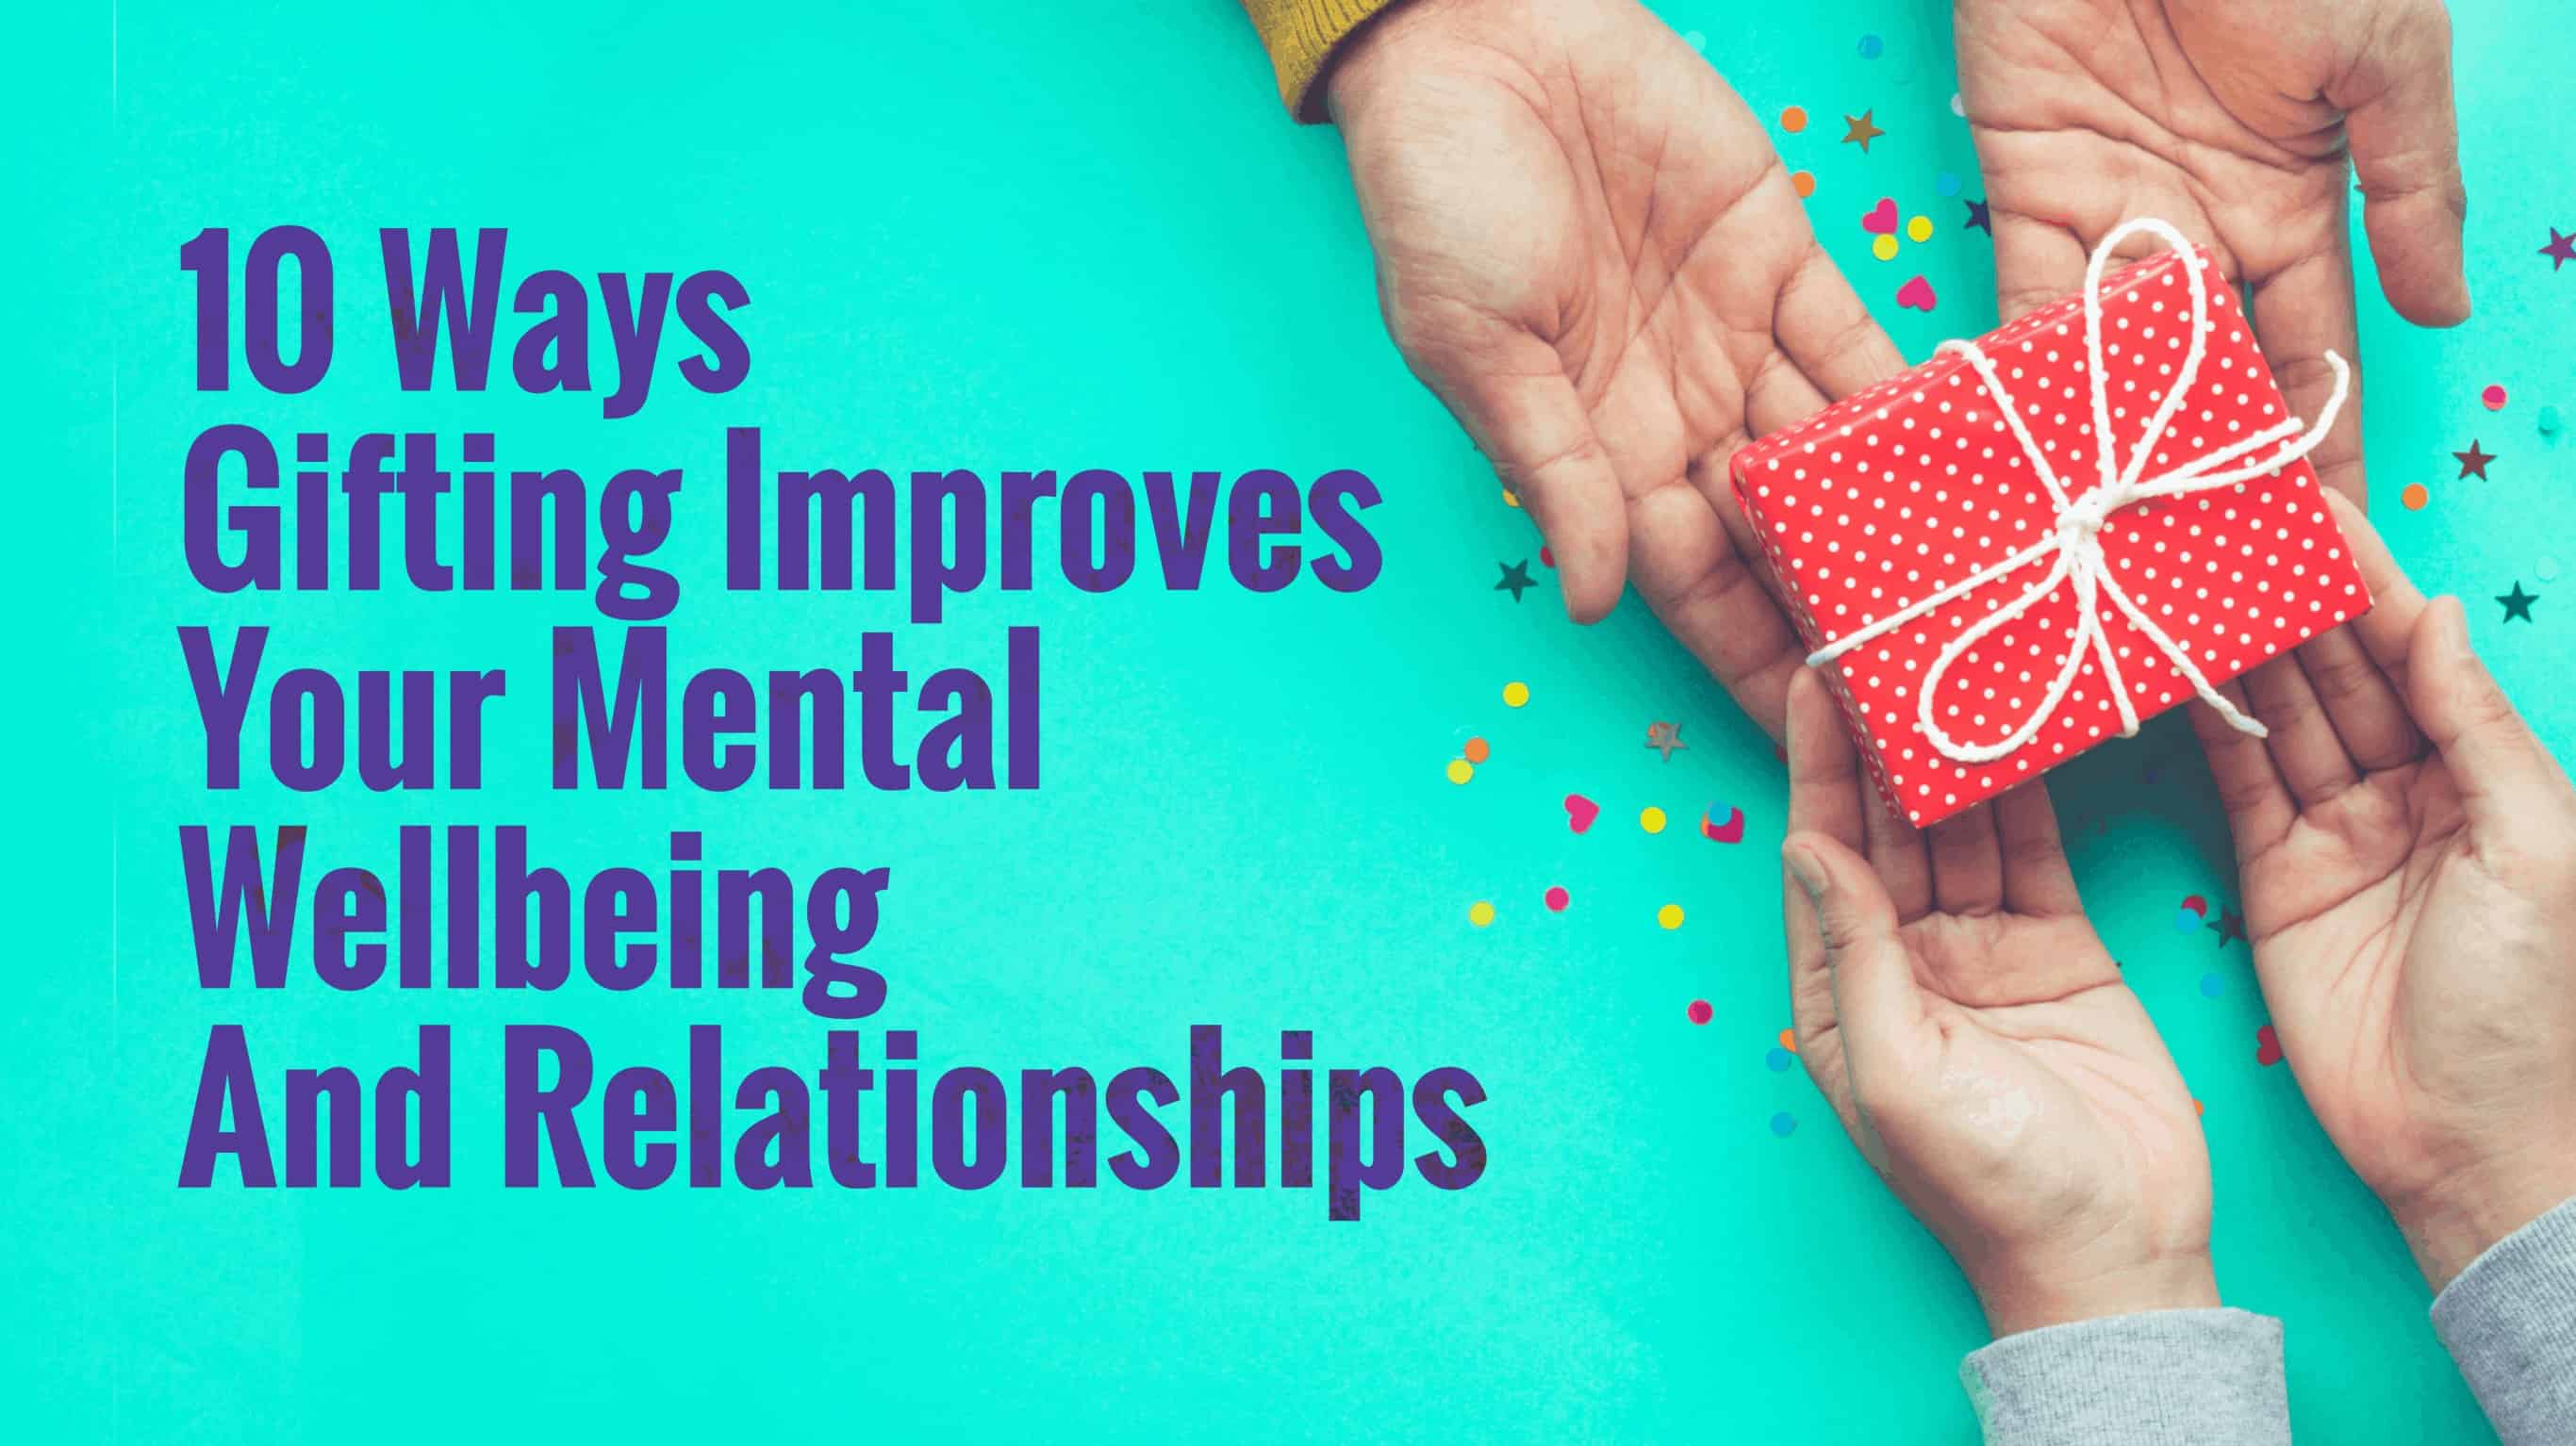 gifting improves mental wellbeing